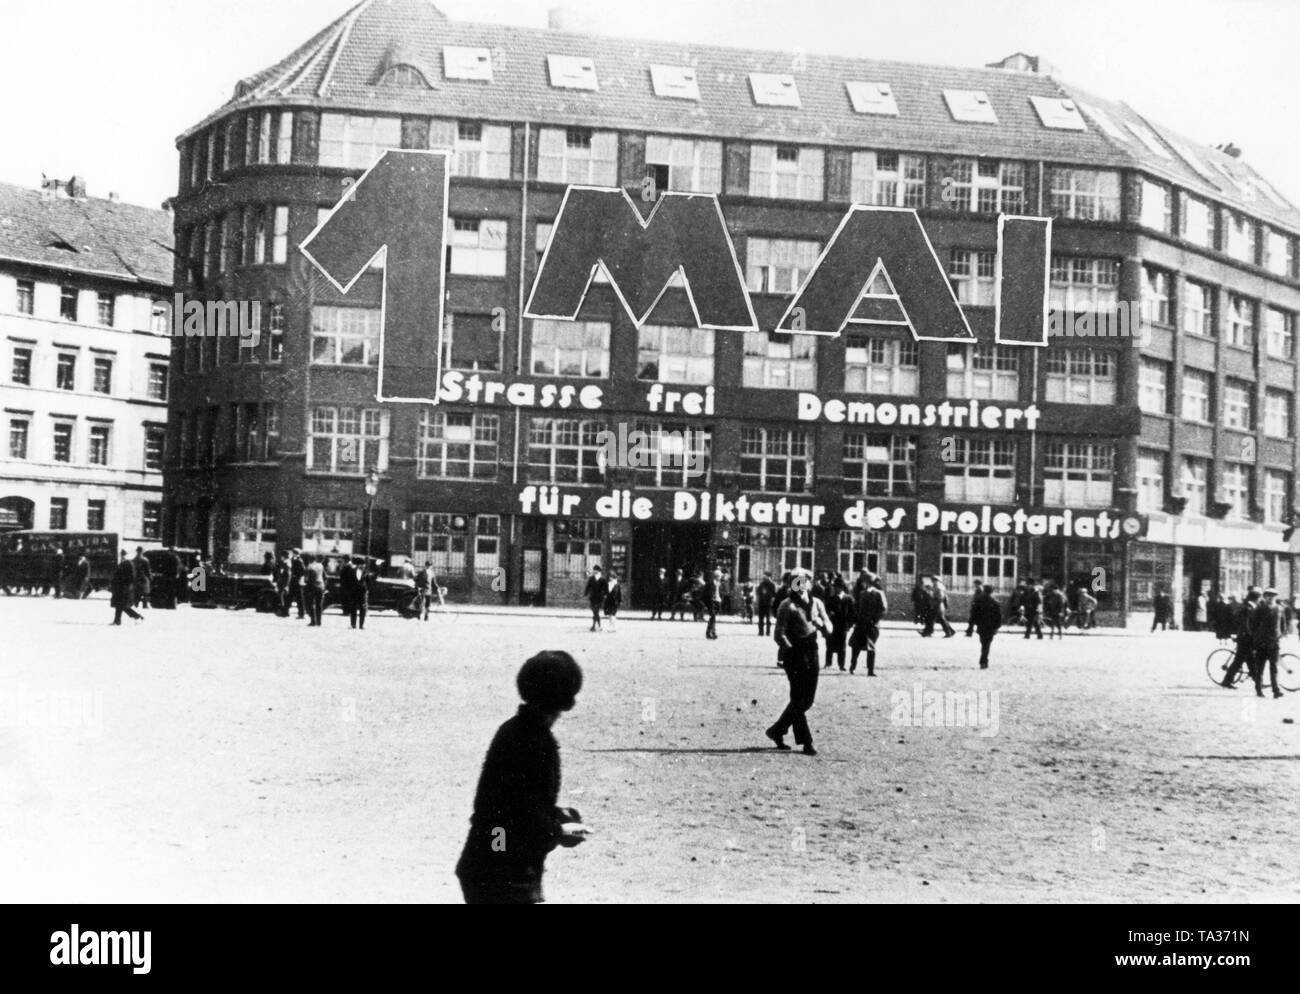 In front of the Karl-Liebknechthaus at Buelowplatz in Berlin, seat of the editorial office of the 'Die Rote Fahne', heavy street battles took place on May Day with the Berlin police, who opened fire on the demonstrators. On the facade stands '1st of May the street  demonstrates freely for the dictatorship of the proletariat'. Stock Photo